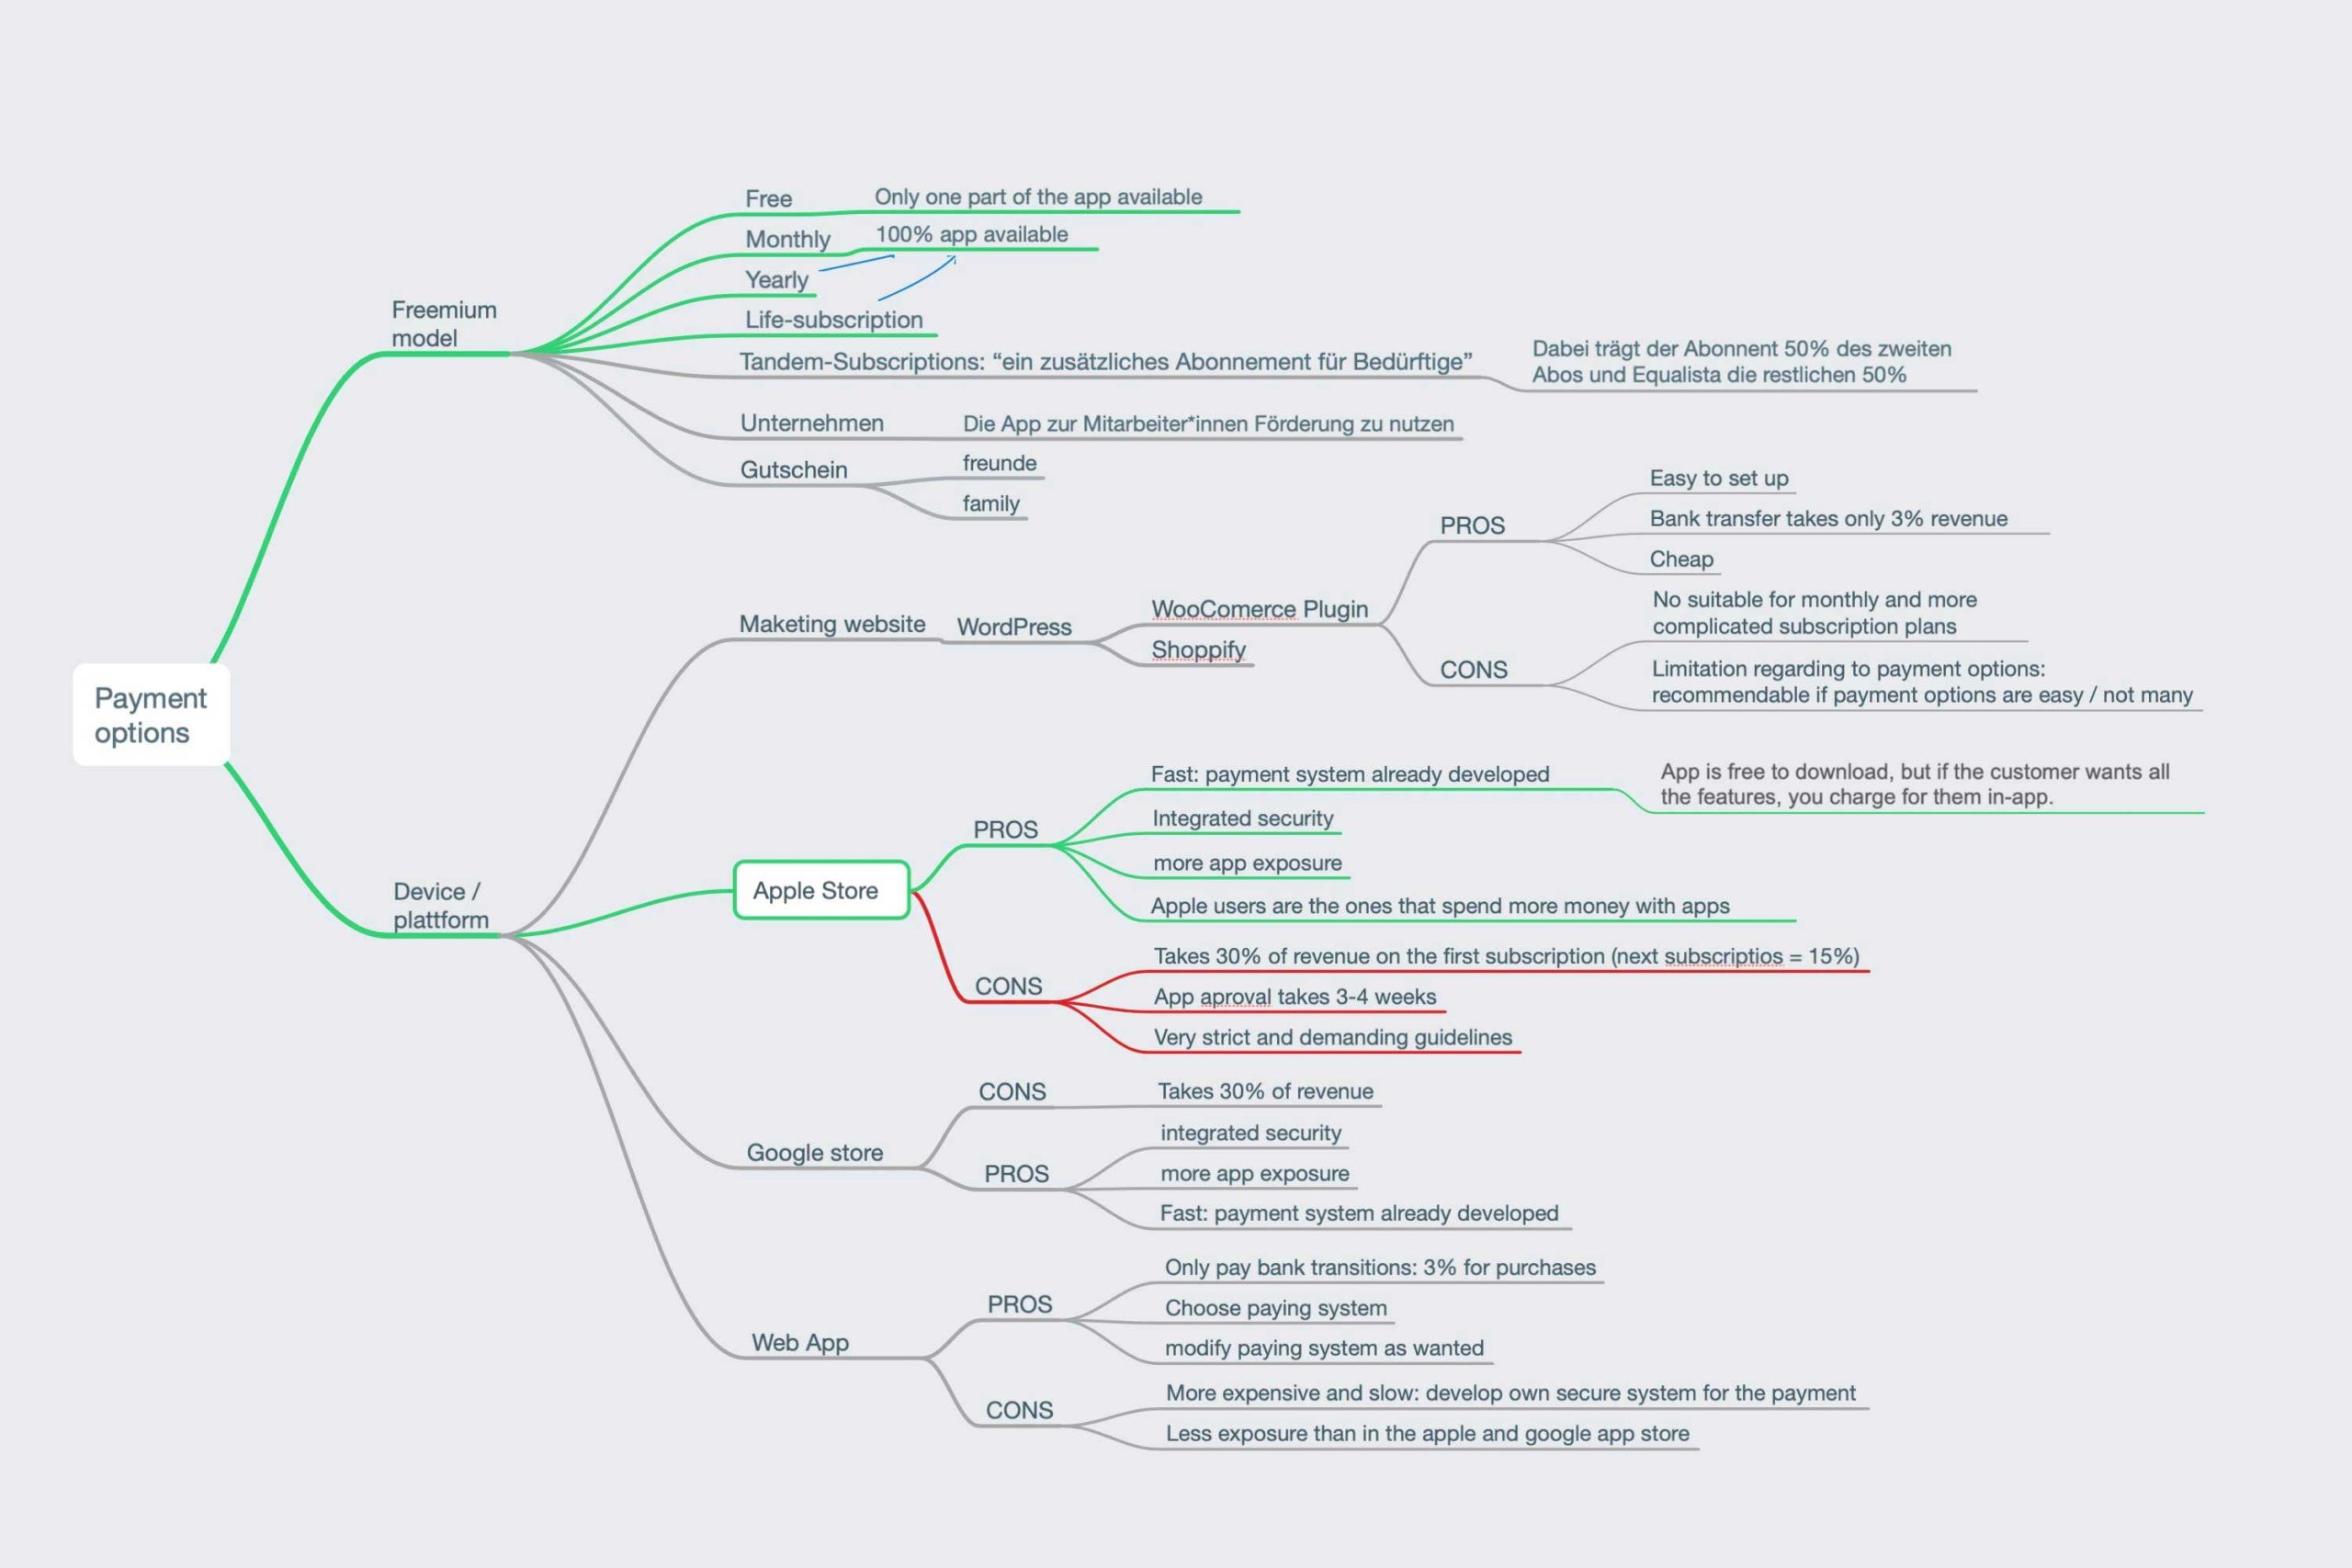 Mind-map payment options